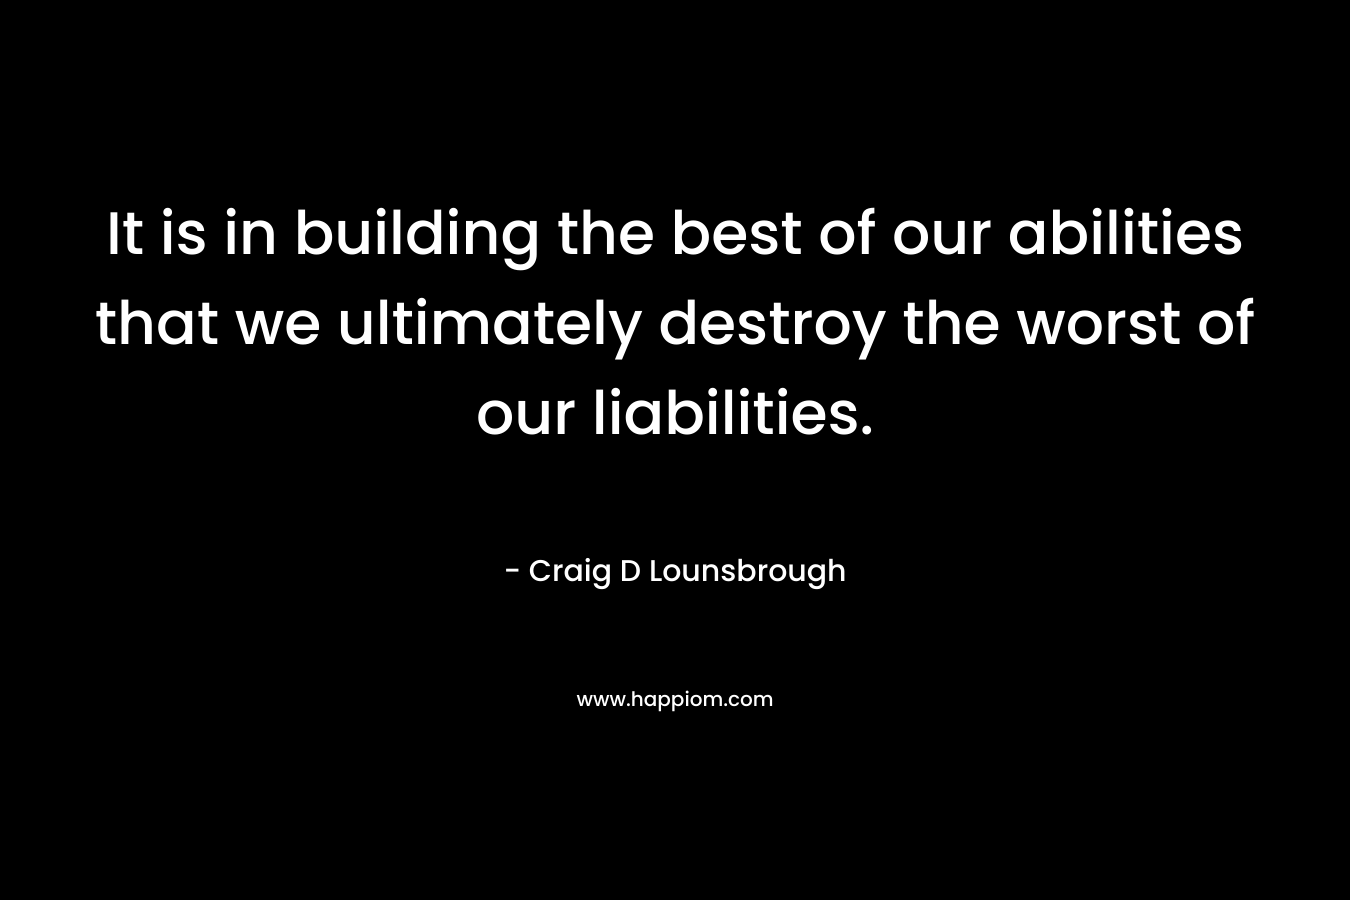 It is in building the best of our abilities that we ultimately destroy the worst of our liabilities. – Craig D Lounsbrough